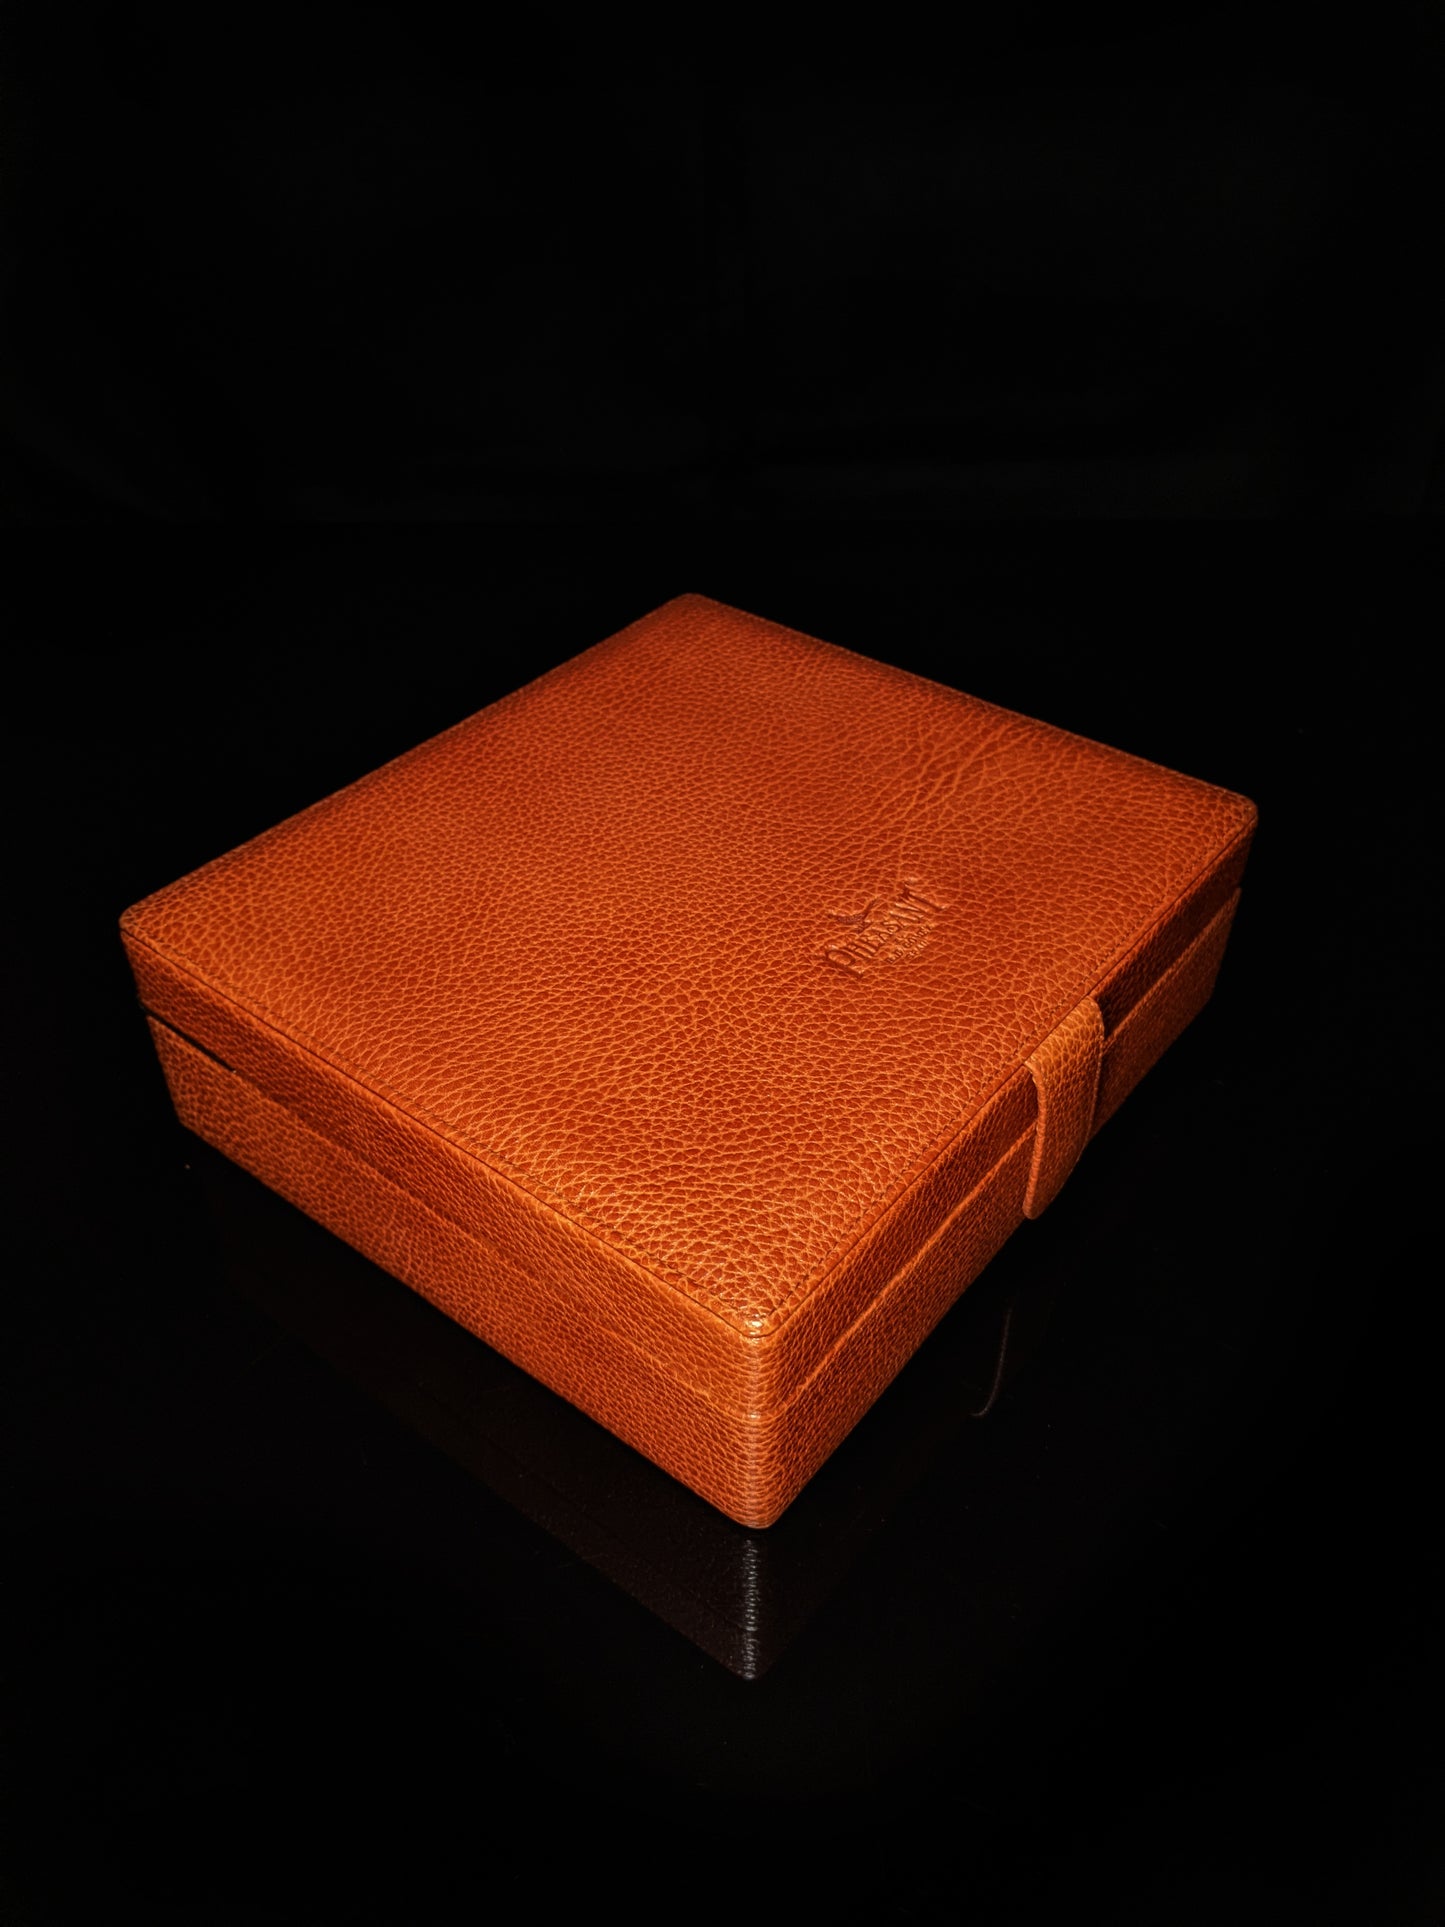 Pheasant Leather Humidor made in Spain by RD Gomez NIB